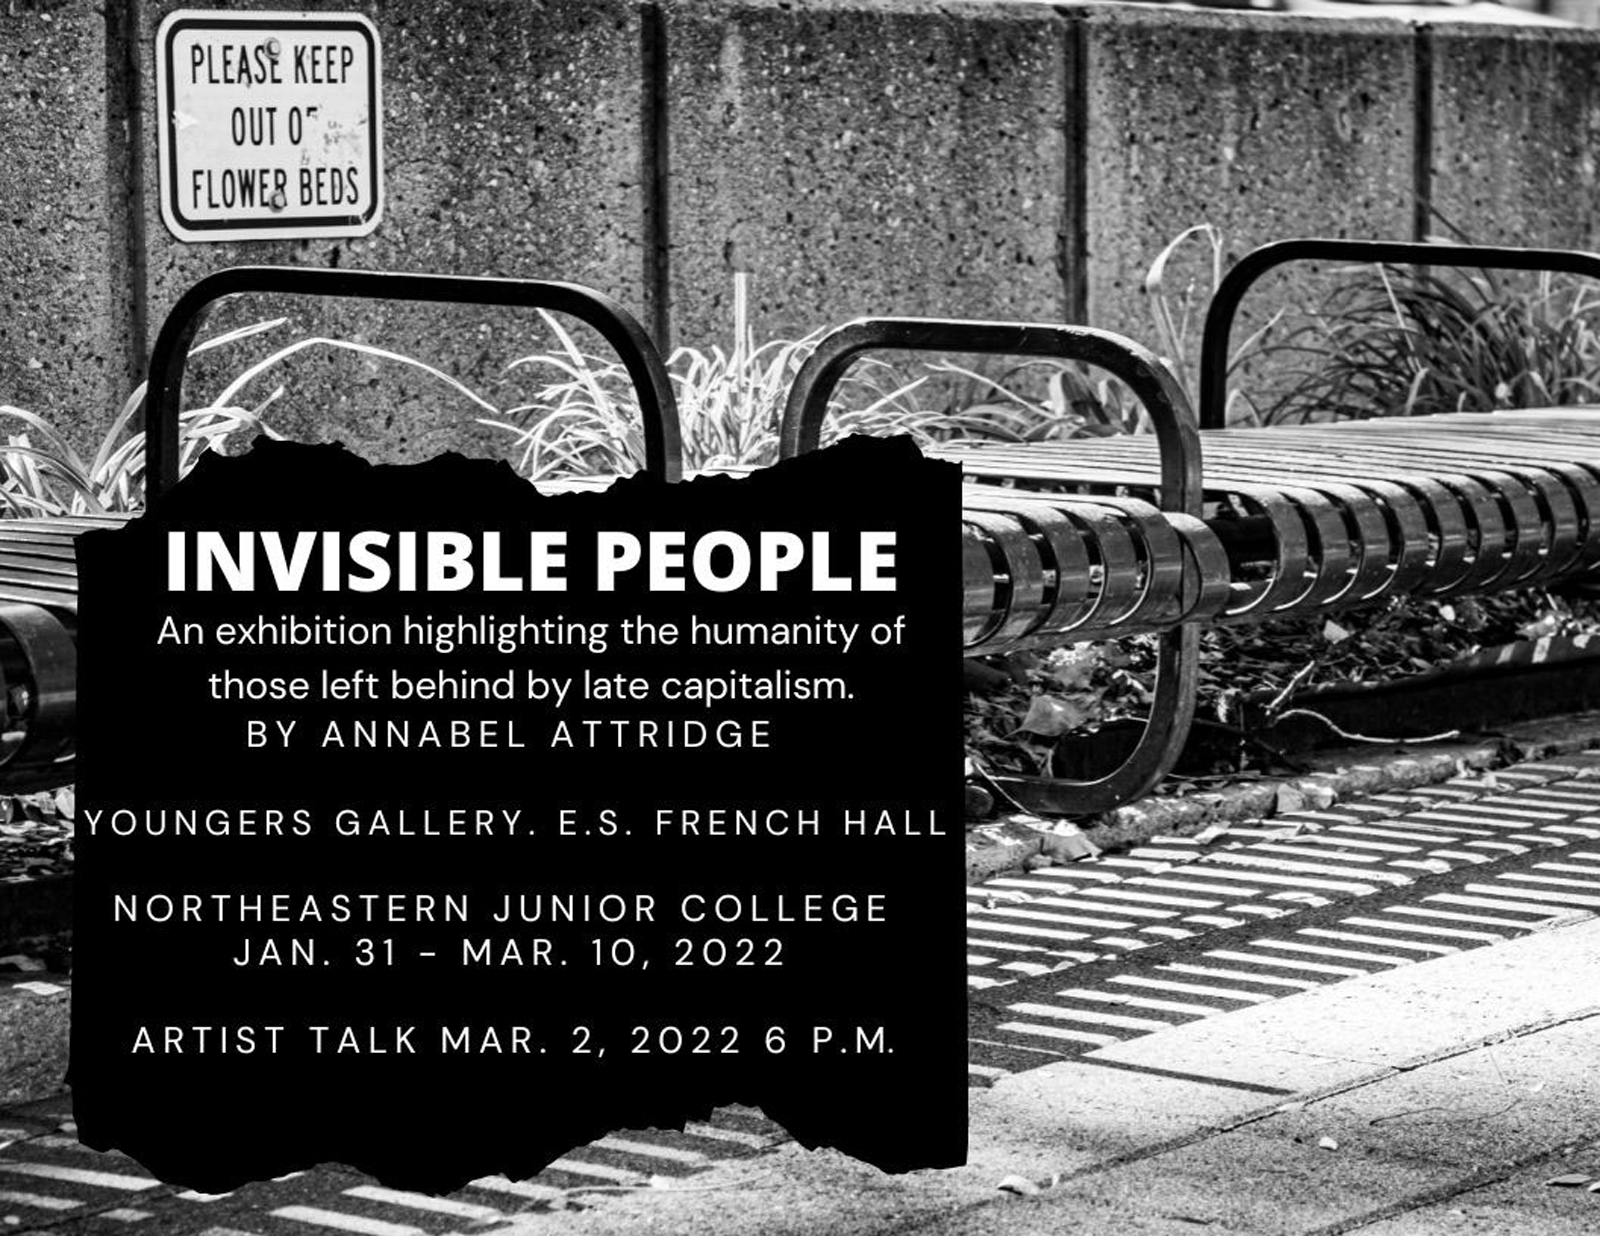 Invisible People - An exhibition highlighting the humanity of those left behind by late capitalism..